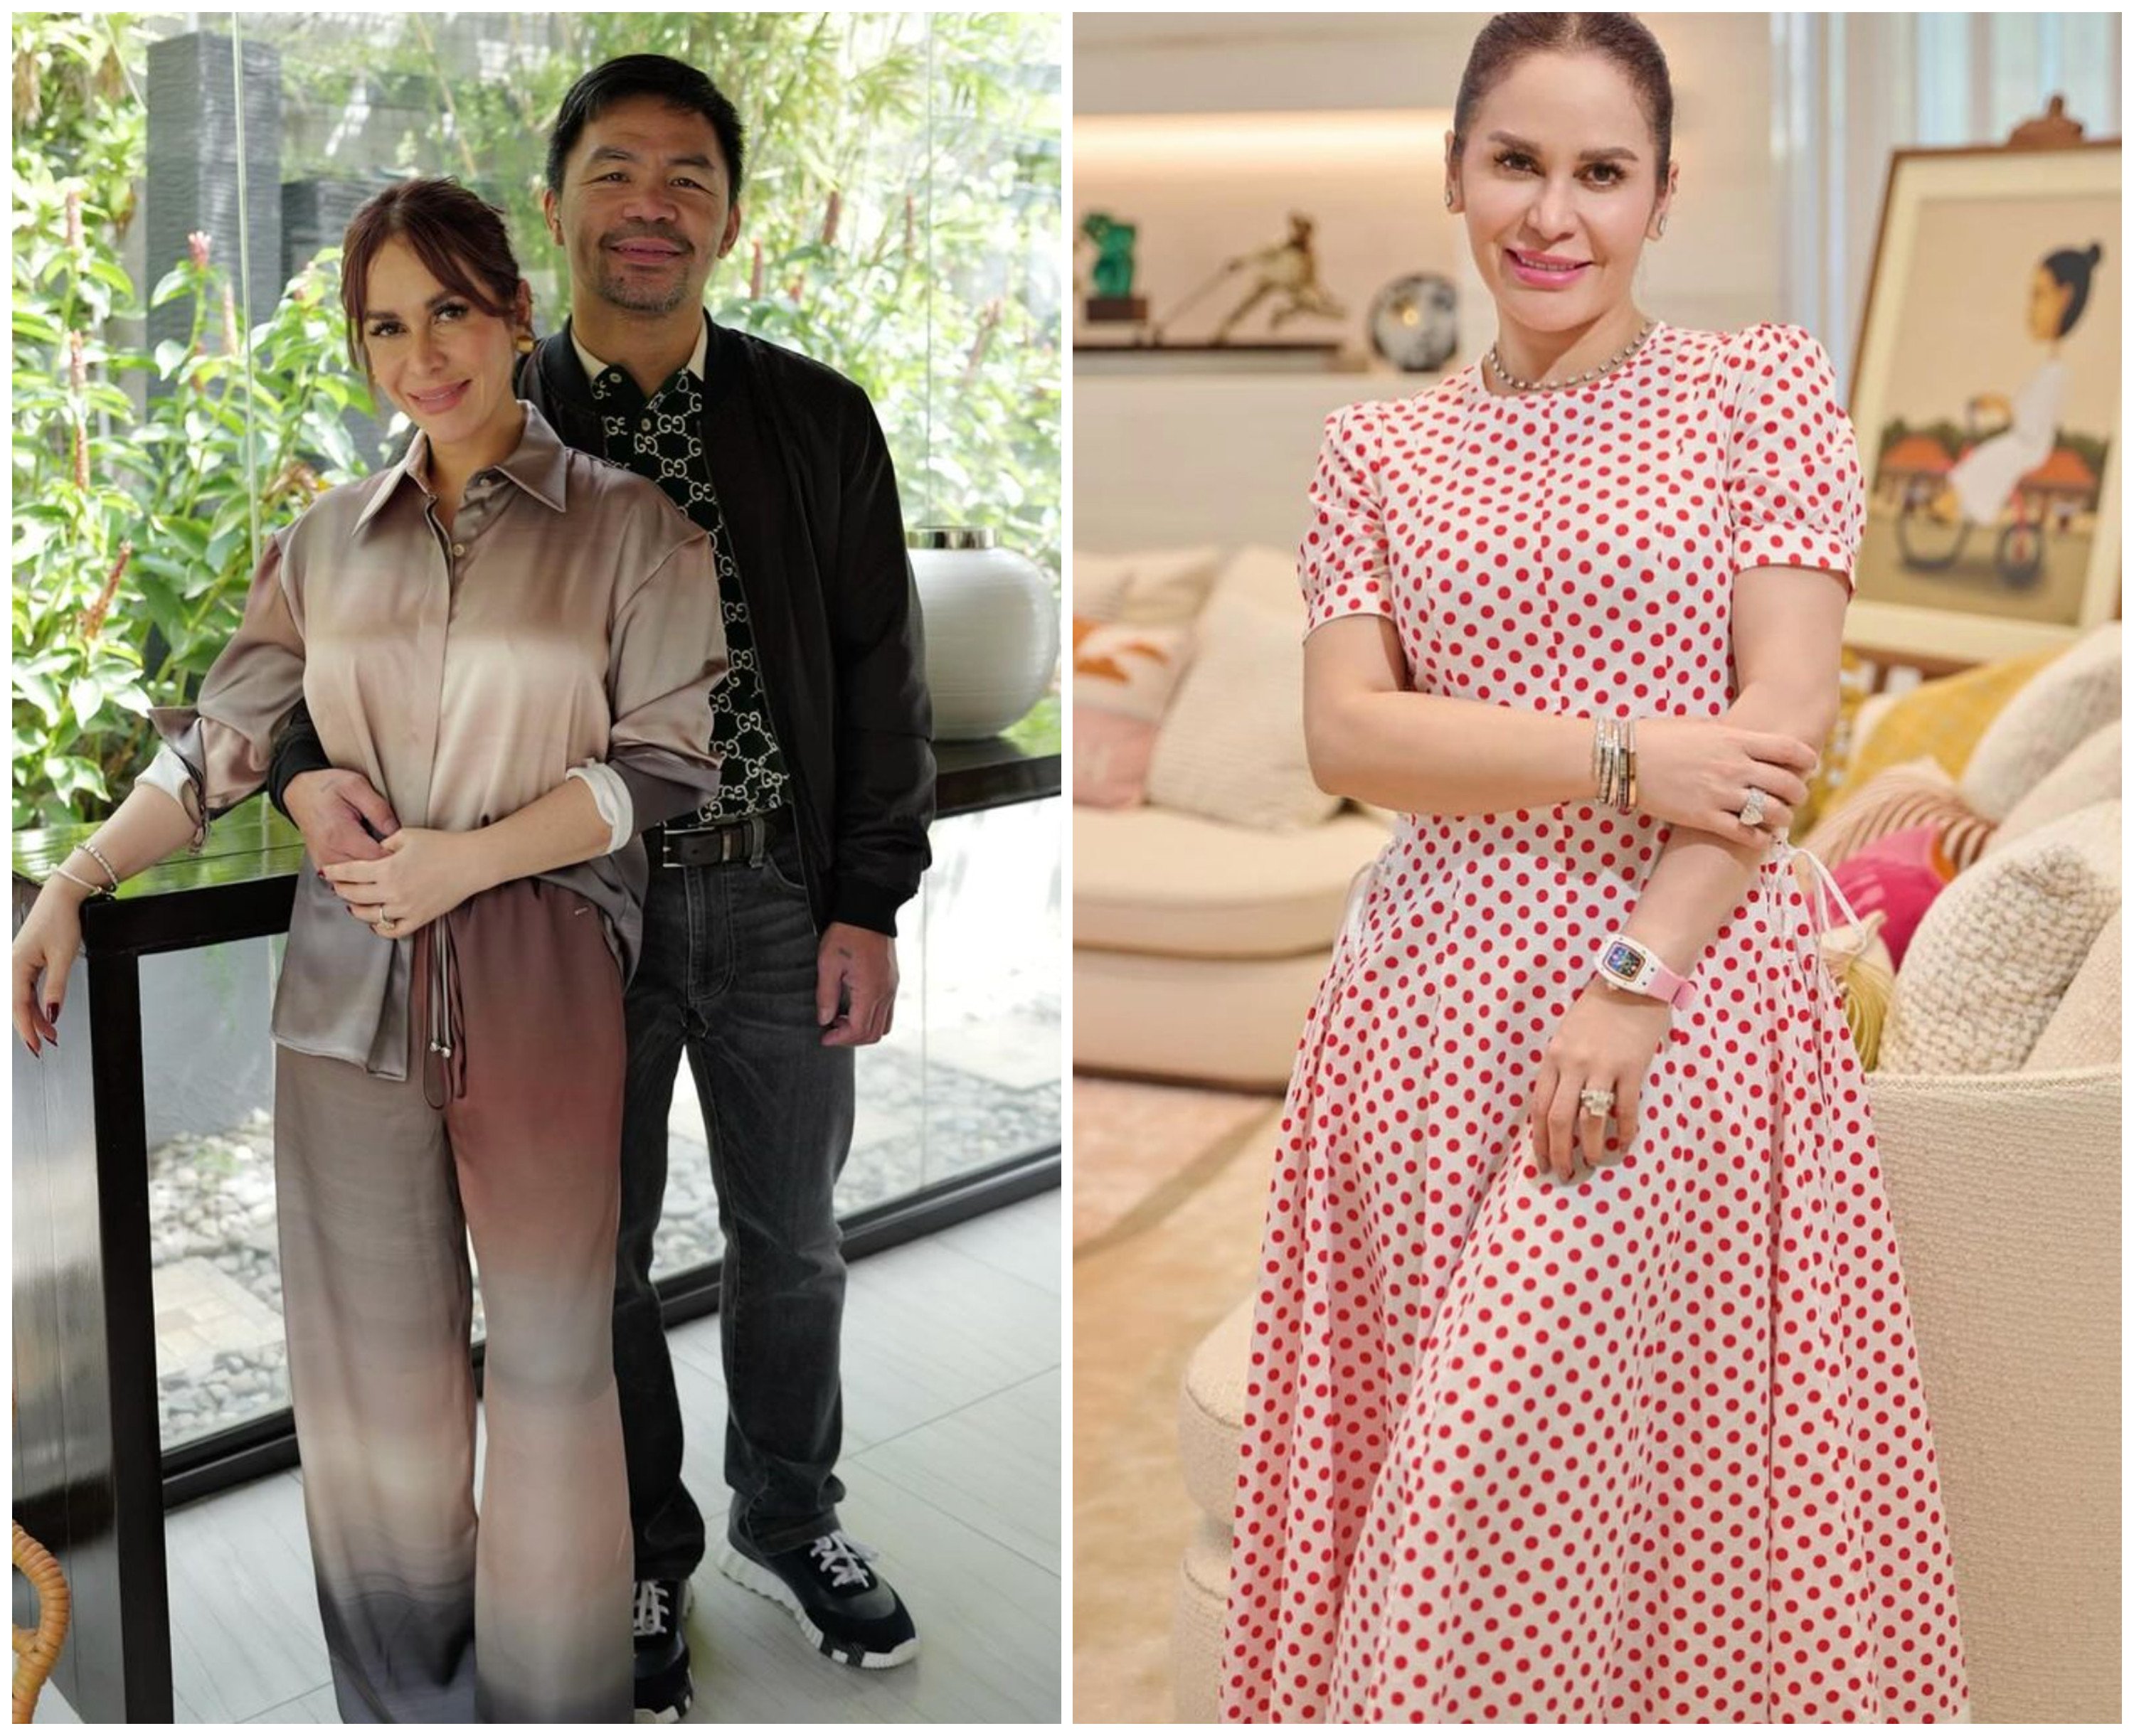 Jinkee Pacquiao is the former vice governor of Sarangani in the Philippines – and is also Manny Pacquiao’s wife. Photos: @jinkeepacquiao/Instagram